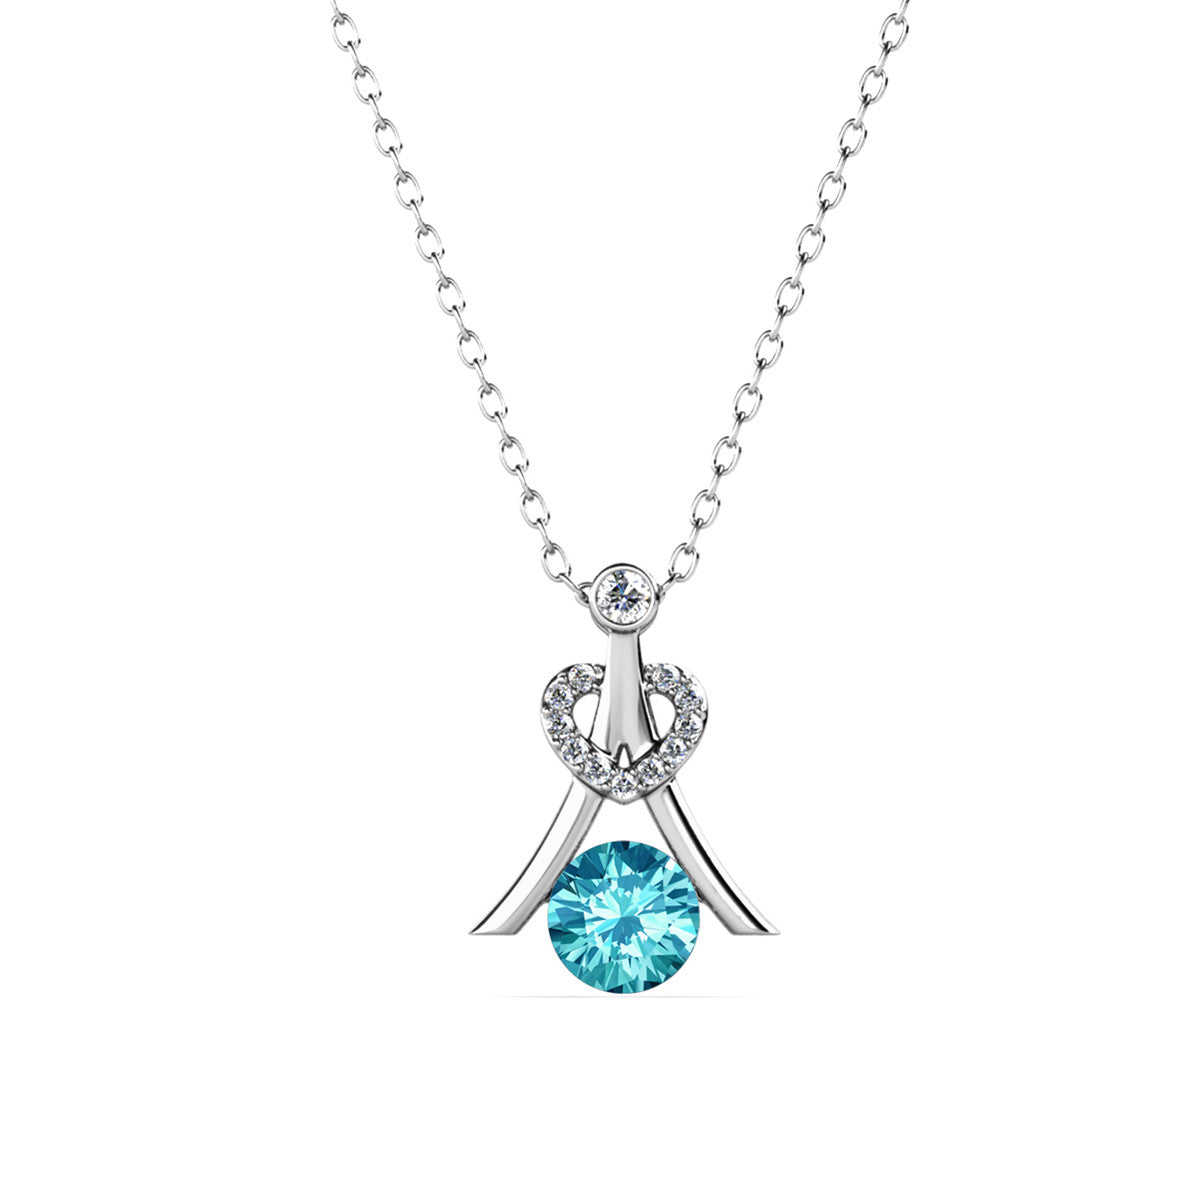 Serenity Birthstone Necklace 18k White Gold Plated with Round Cut Crystals